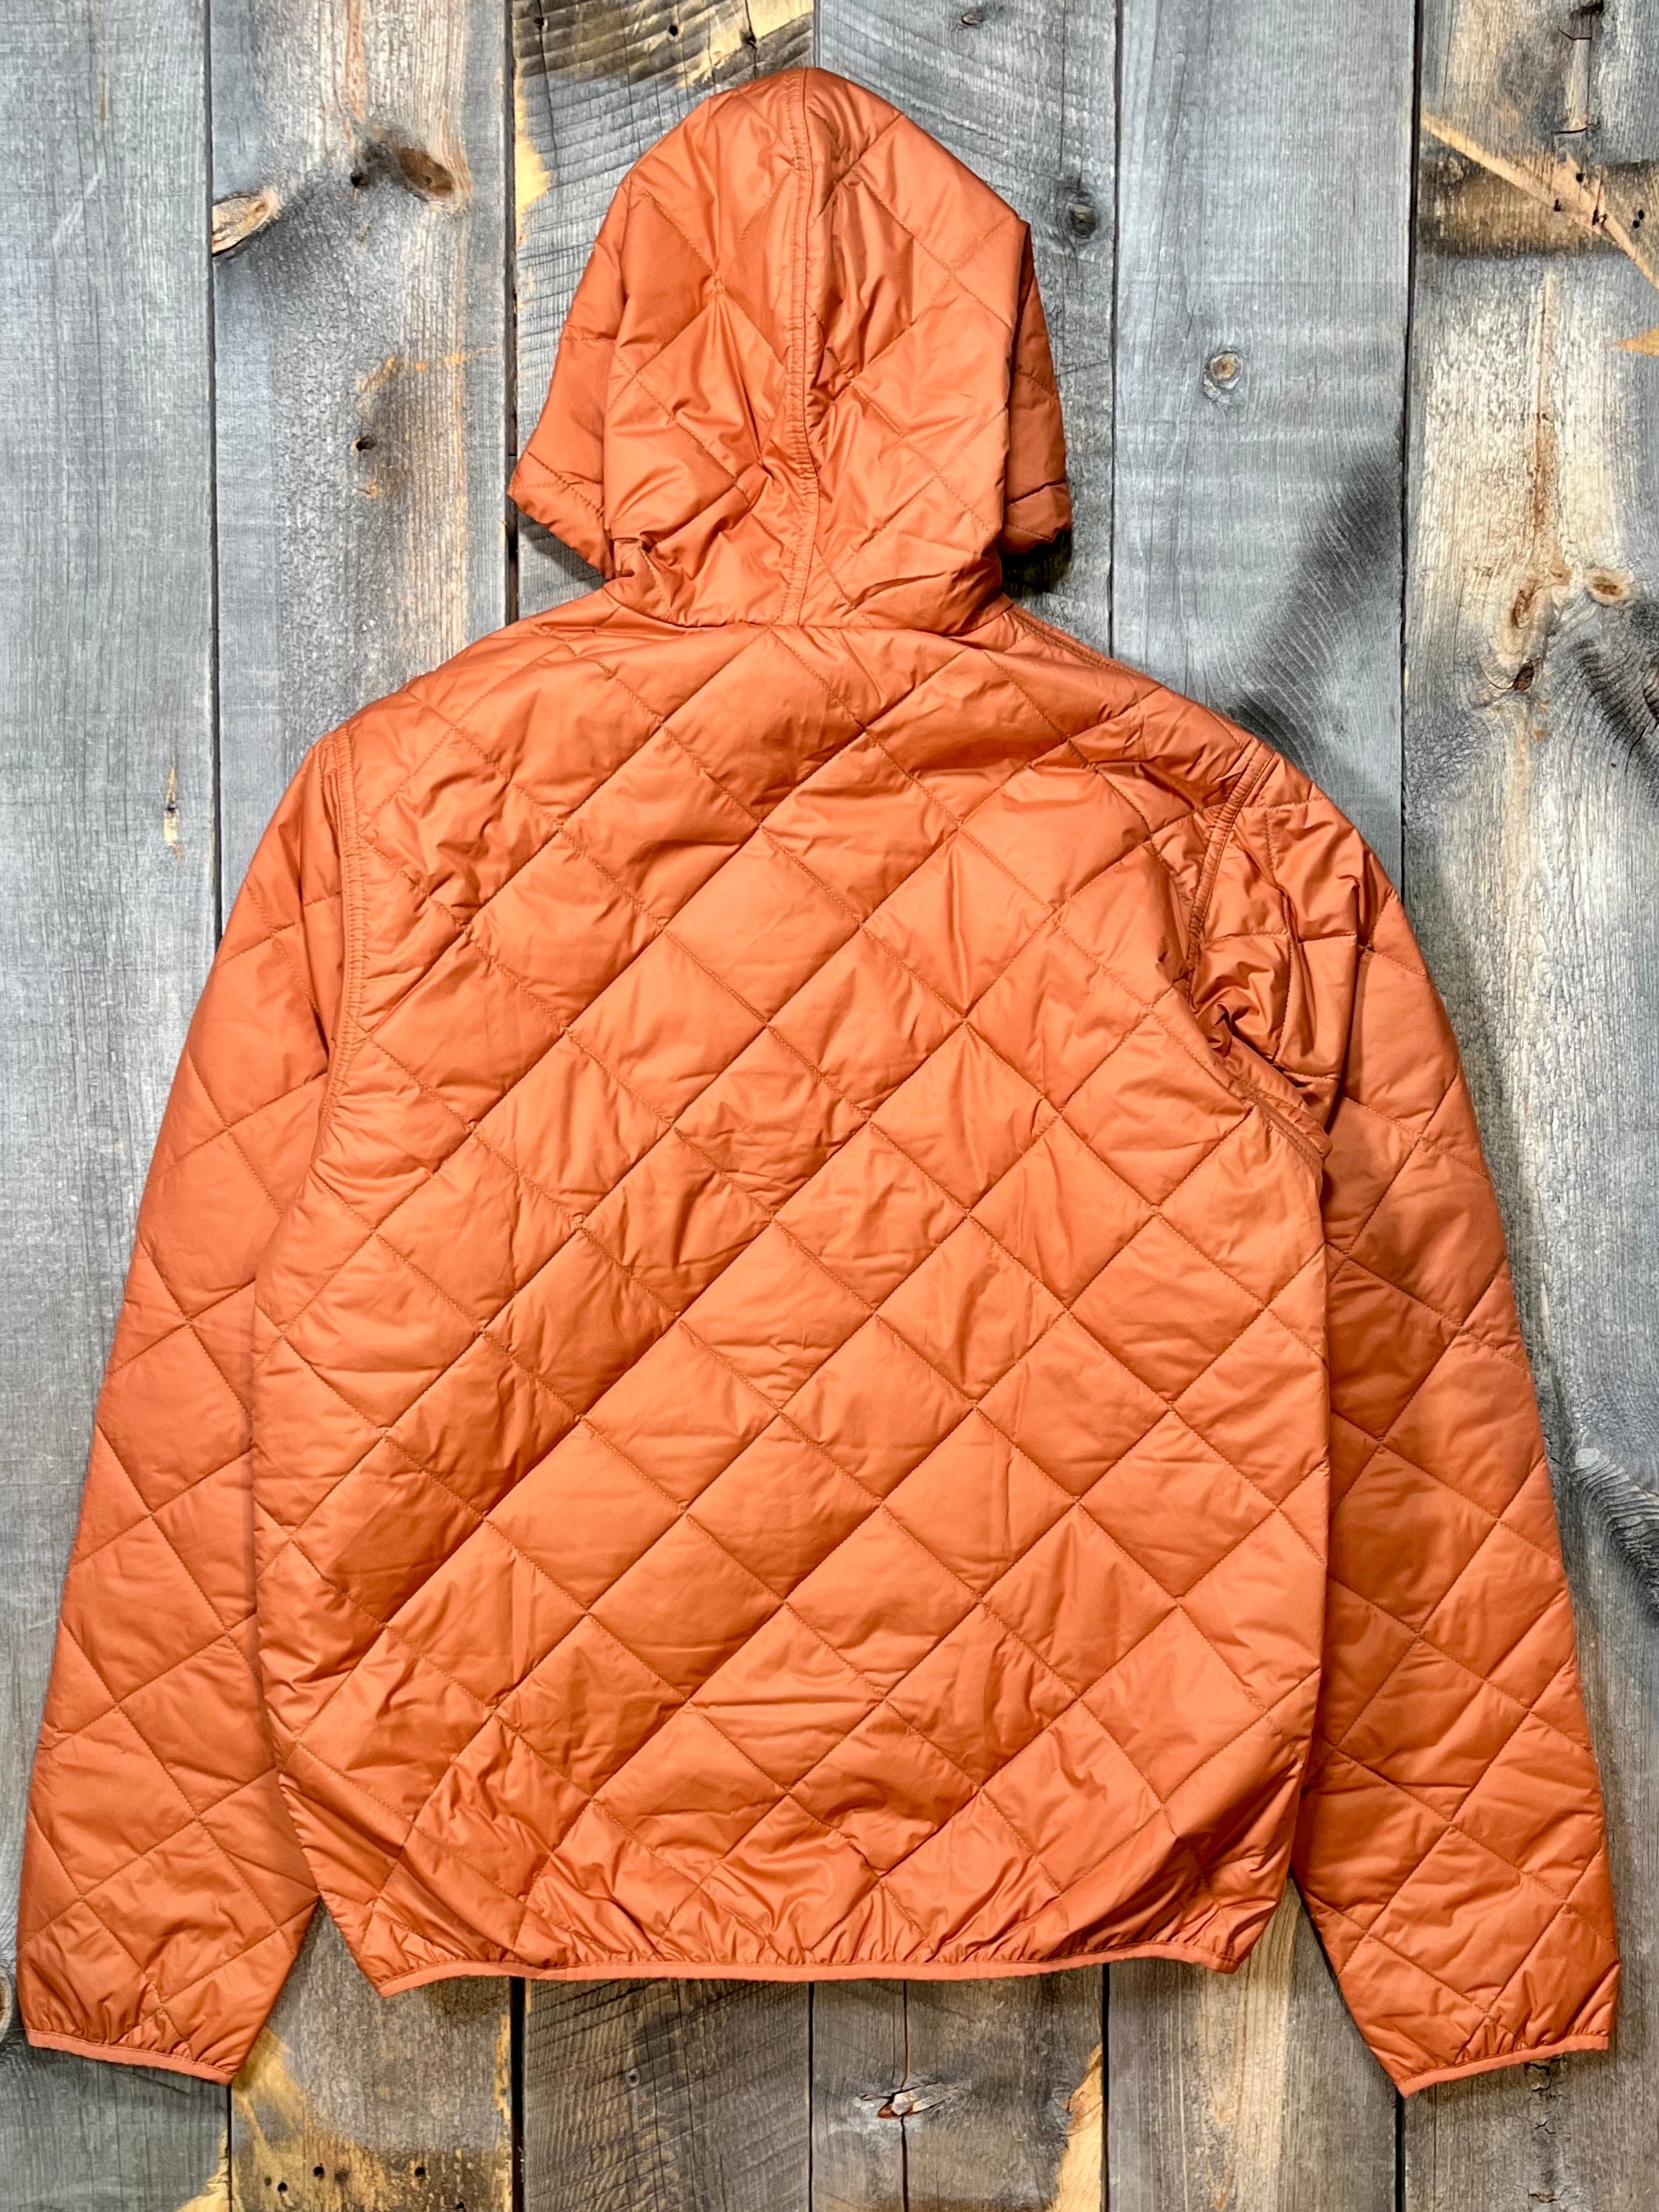 Patagonia – ASHER GOODS Co.